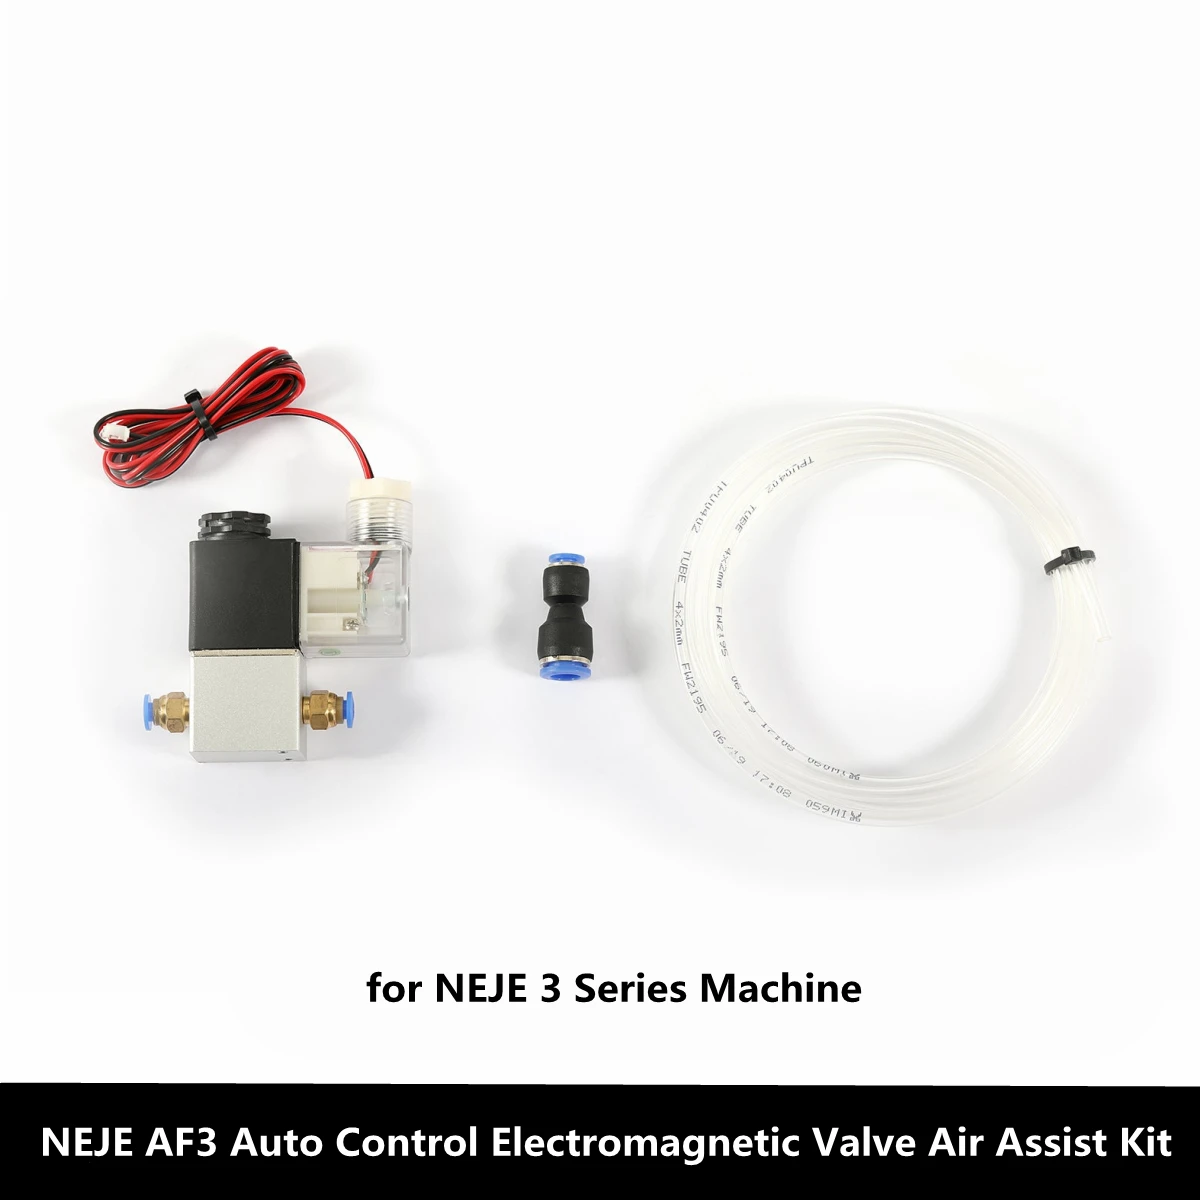 

NEJE AF3 Auto Control Electromagnetic Valve Air Assist Kit for New NEJE Laser Module with NEJE 3 Series Machine - M8 Control